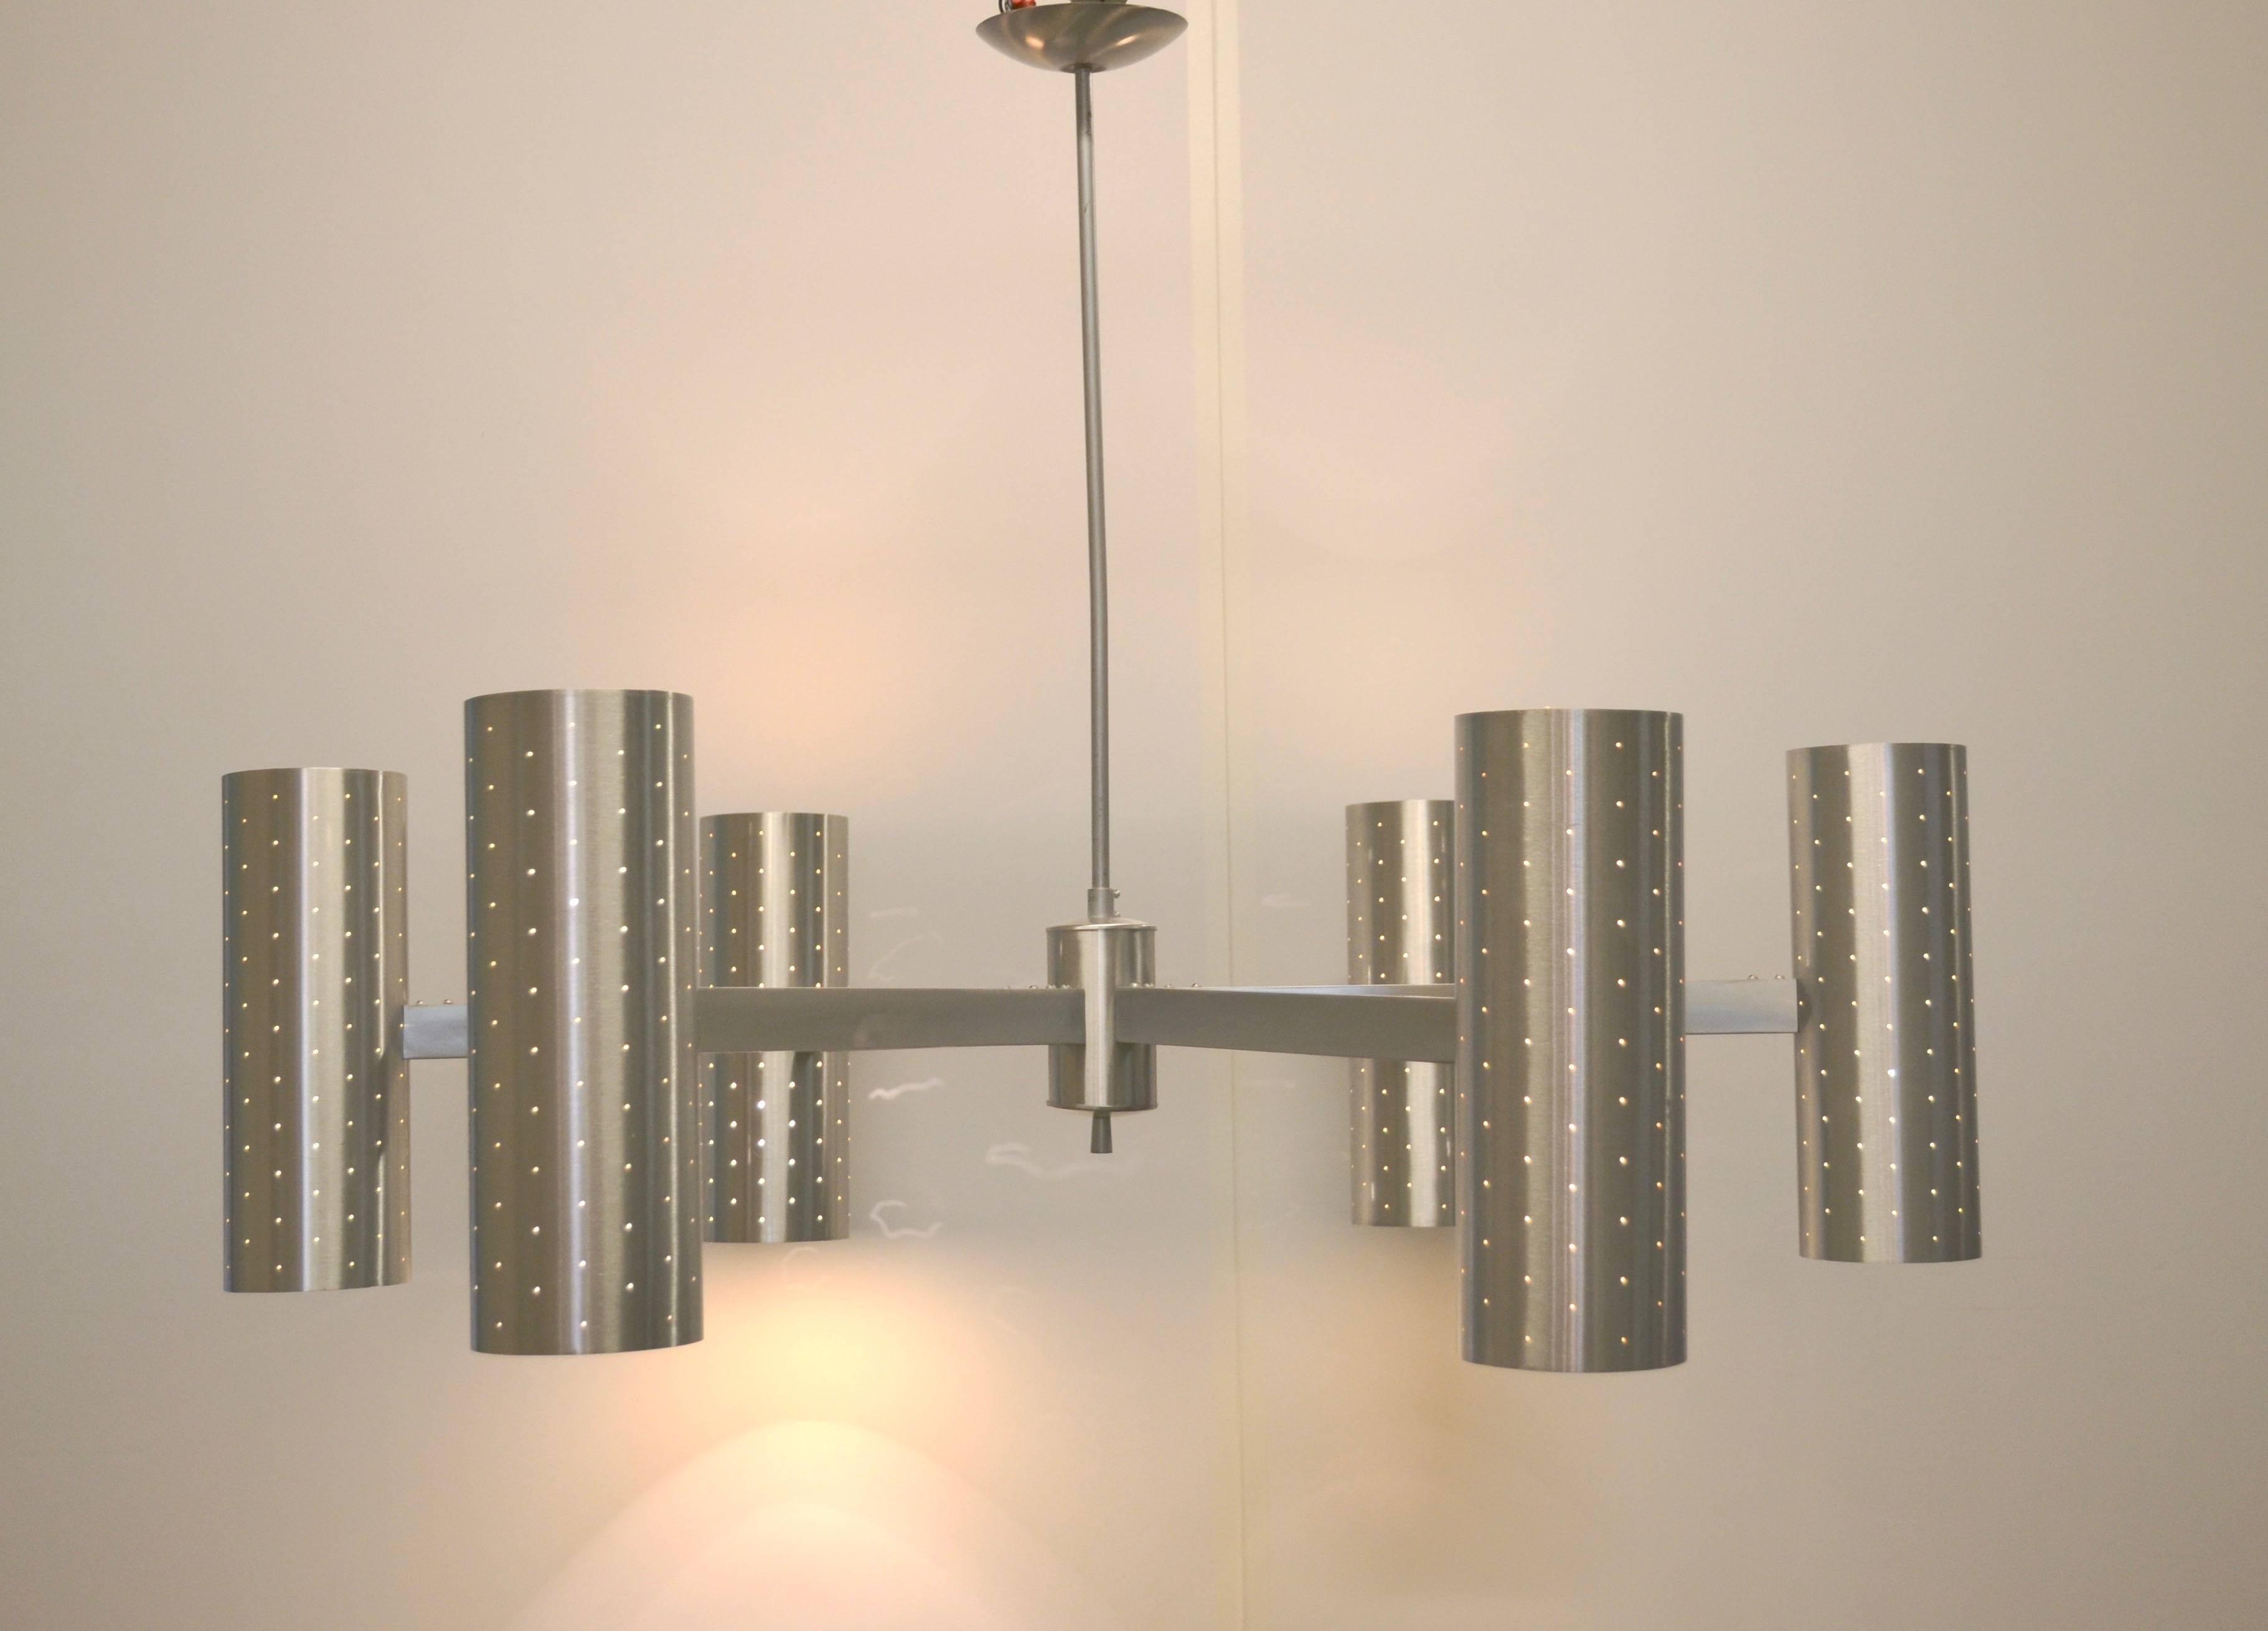 Monumental mid-century modern six armed pendants. Brushed aluminum cylinders emit light from top and bottom (two bulbs per cylinder) and have perforations.  Large scale at 4' diameter. Pair available, but sold individually. With hanging rod